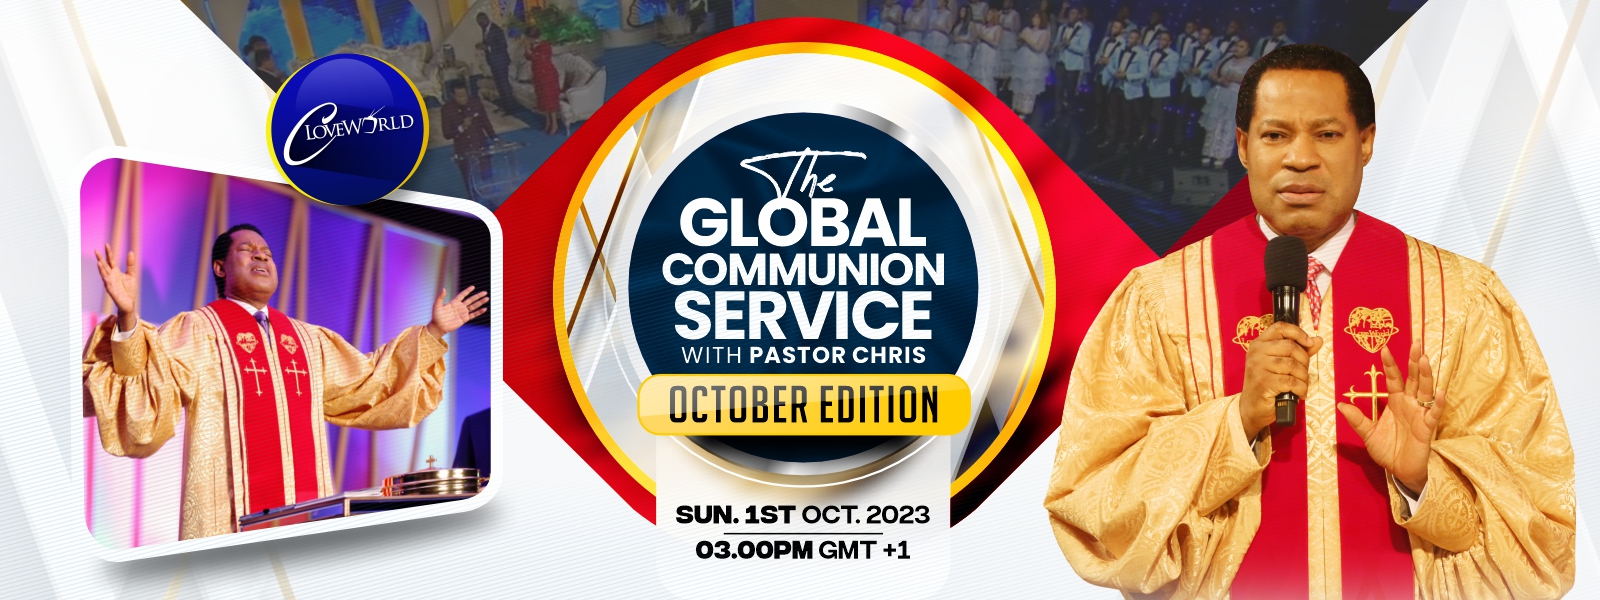 OCTOBER COMMUNION SERVICE WITH PASTOR CHRIS